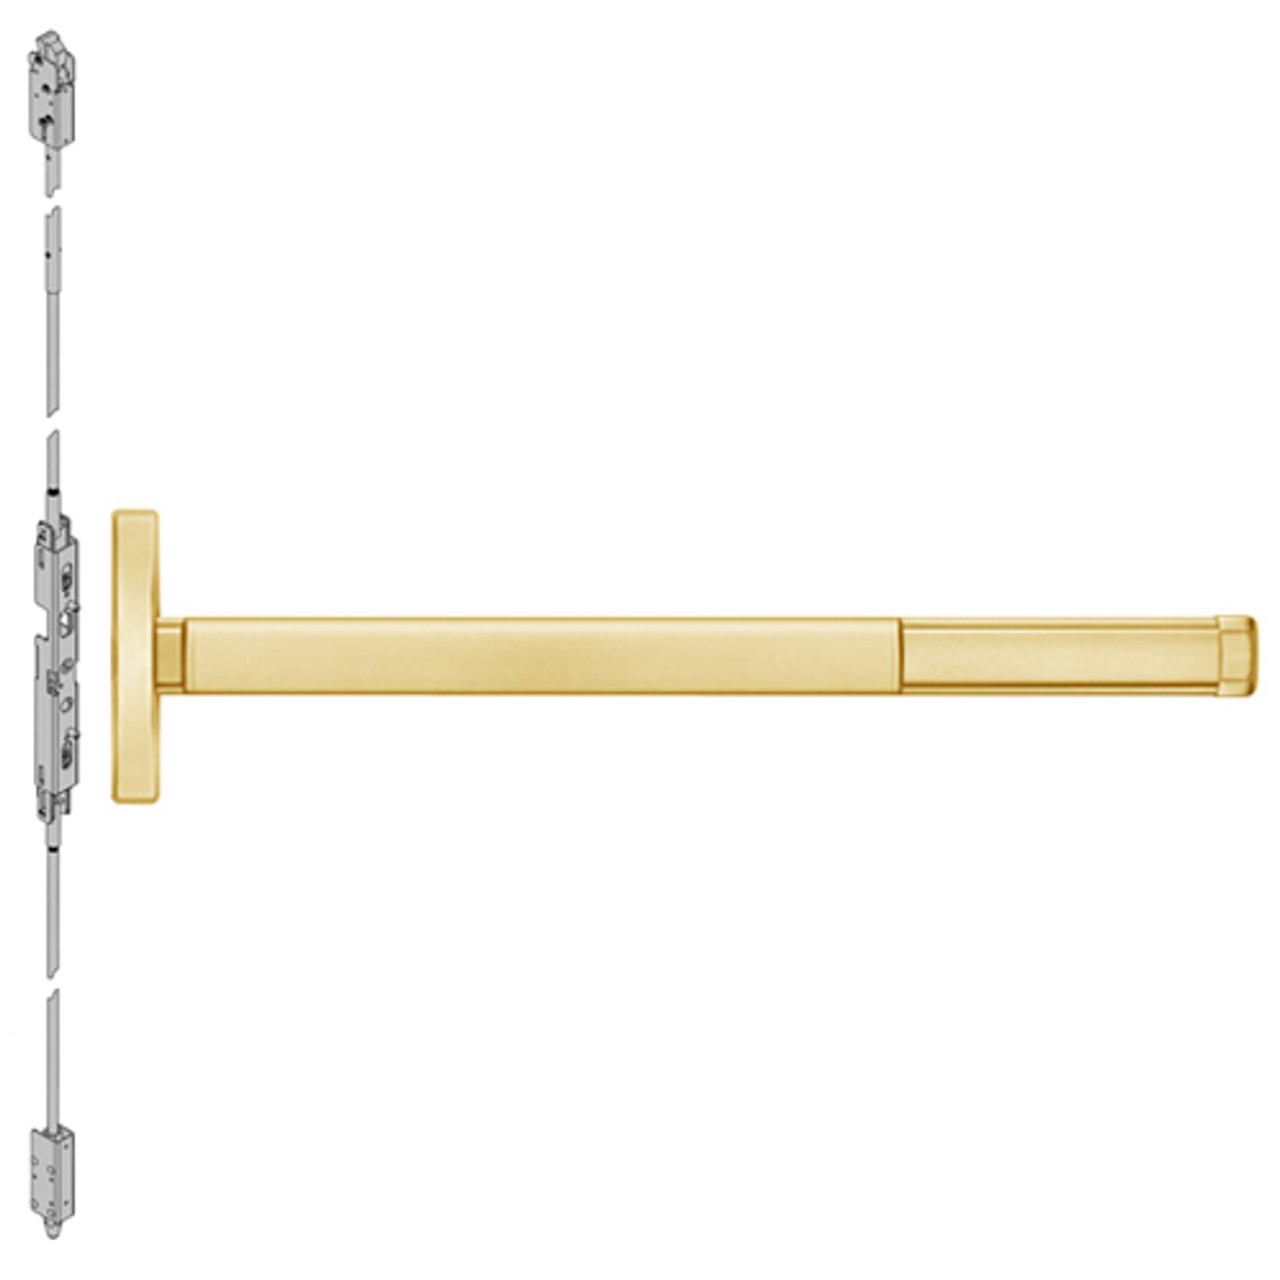 ELR2614LBR-605-48 PHI 2600 Series Concealed Vertical Rod Exit Device with Electric Latch Retraction Prepped for Lever Always Active in Bright Brass Finish